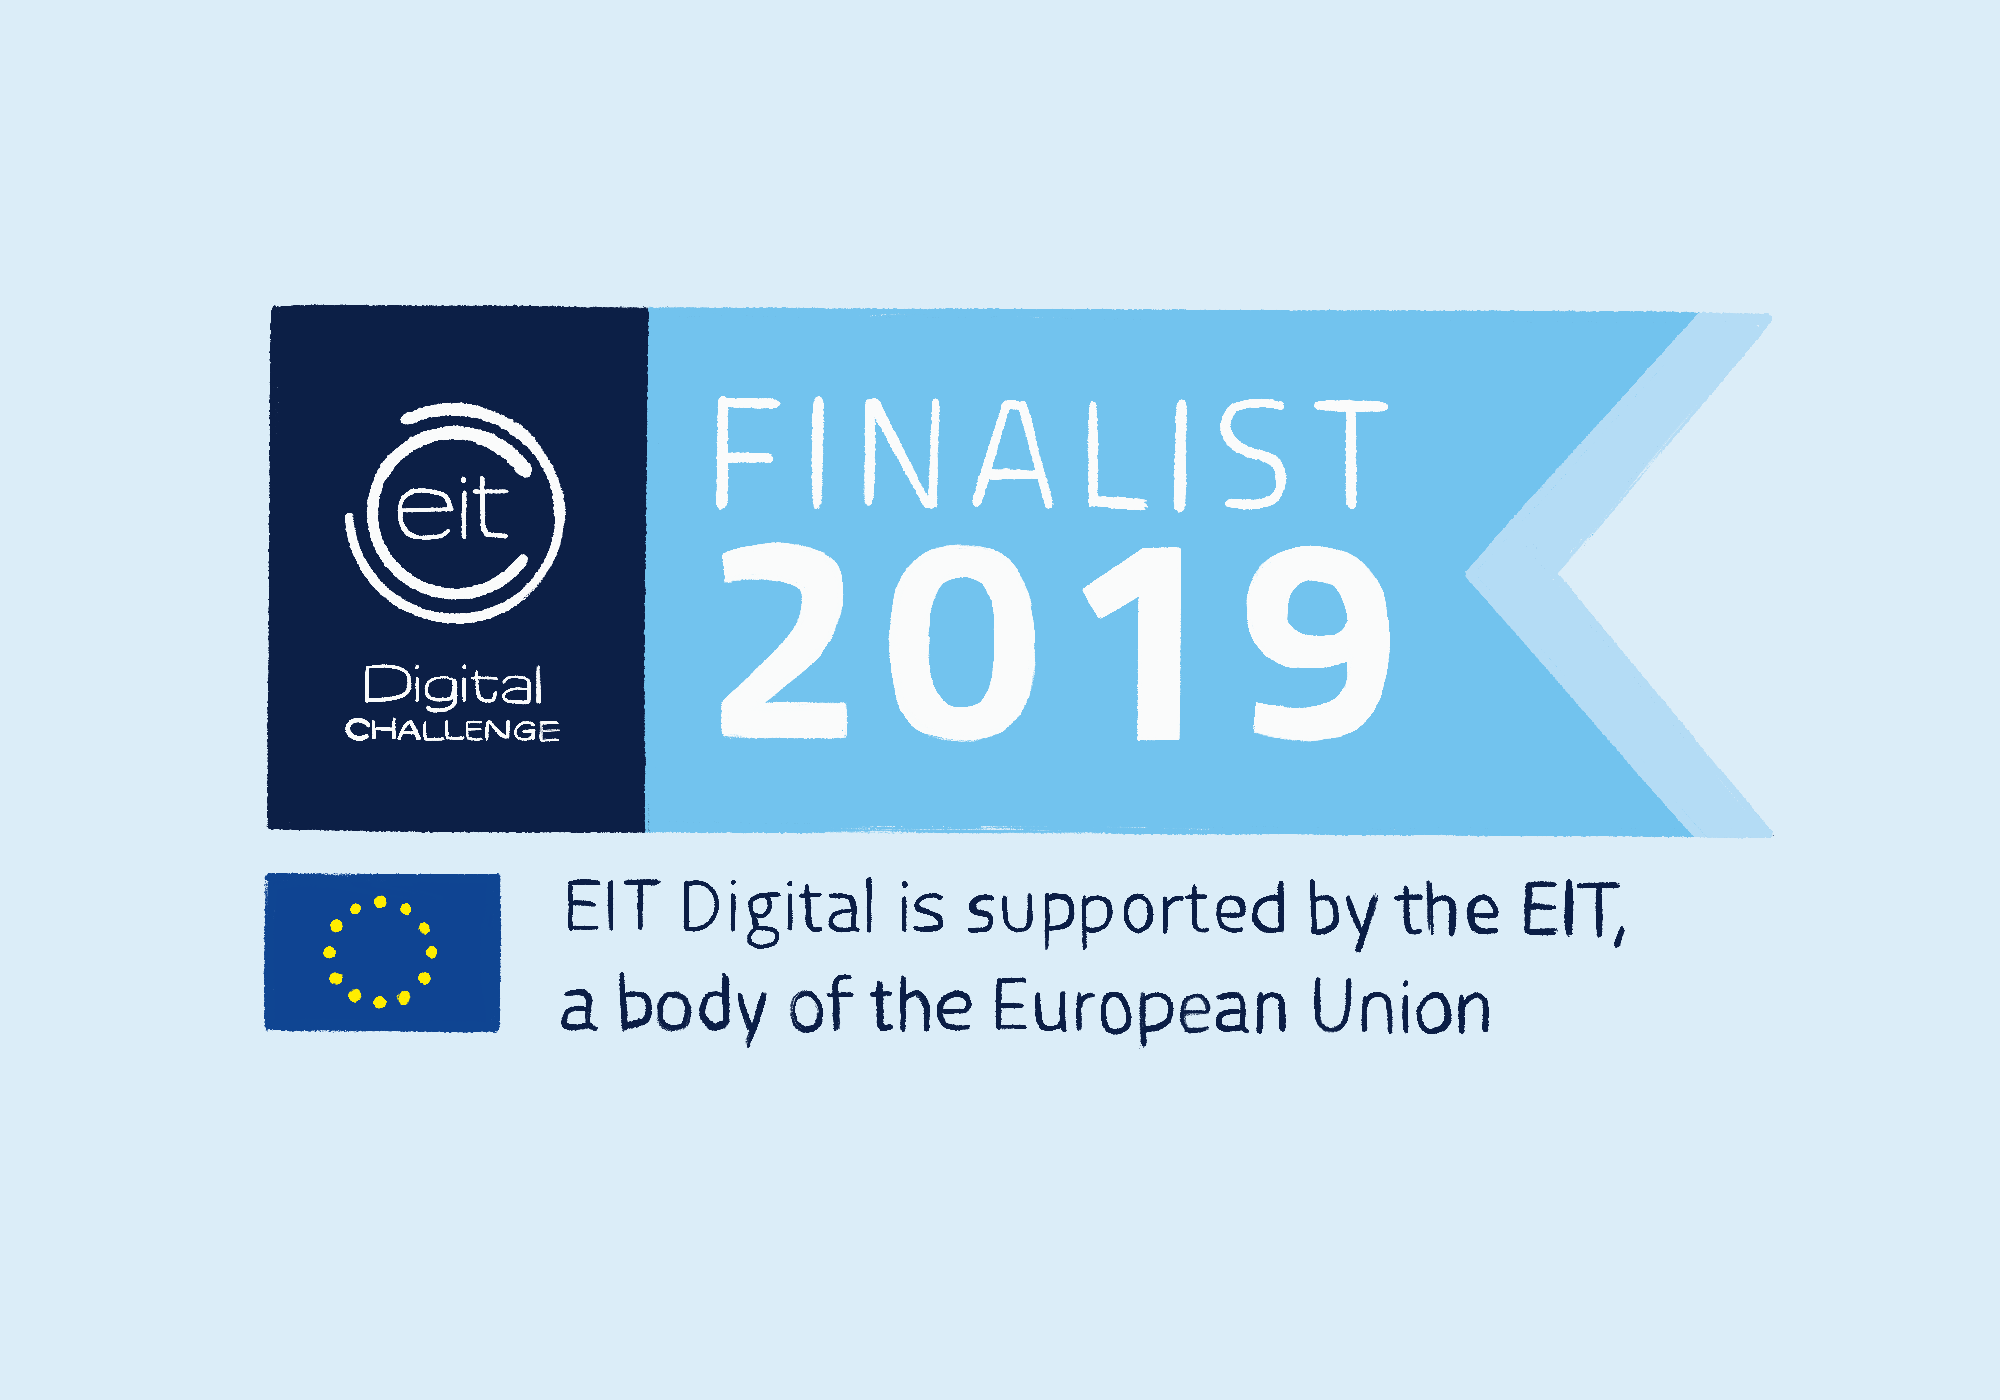 Fractal selected by EIT Digital as one of Europe’s best deep tech scaleups